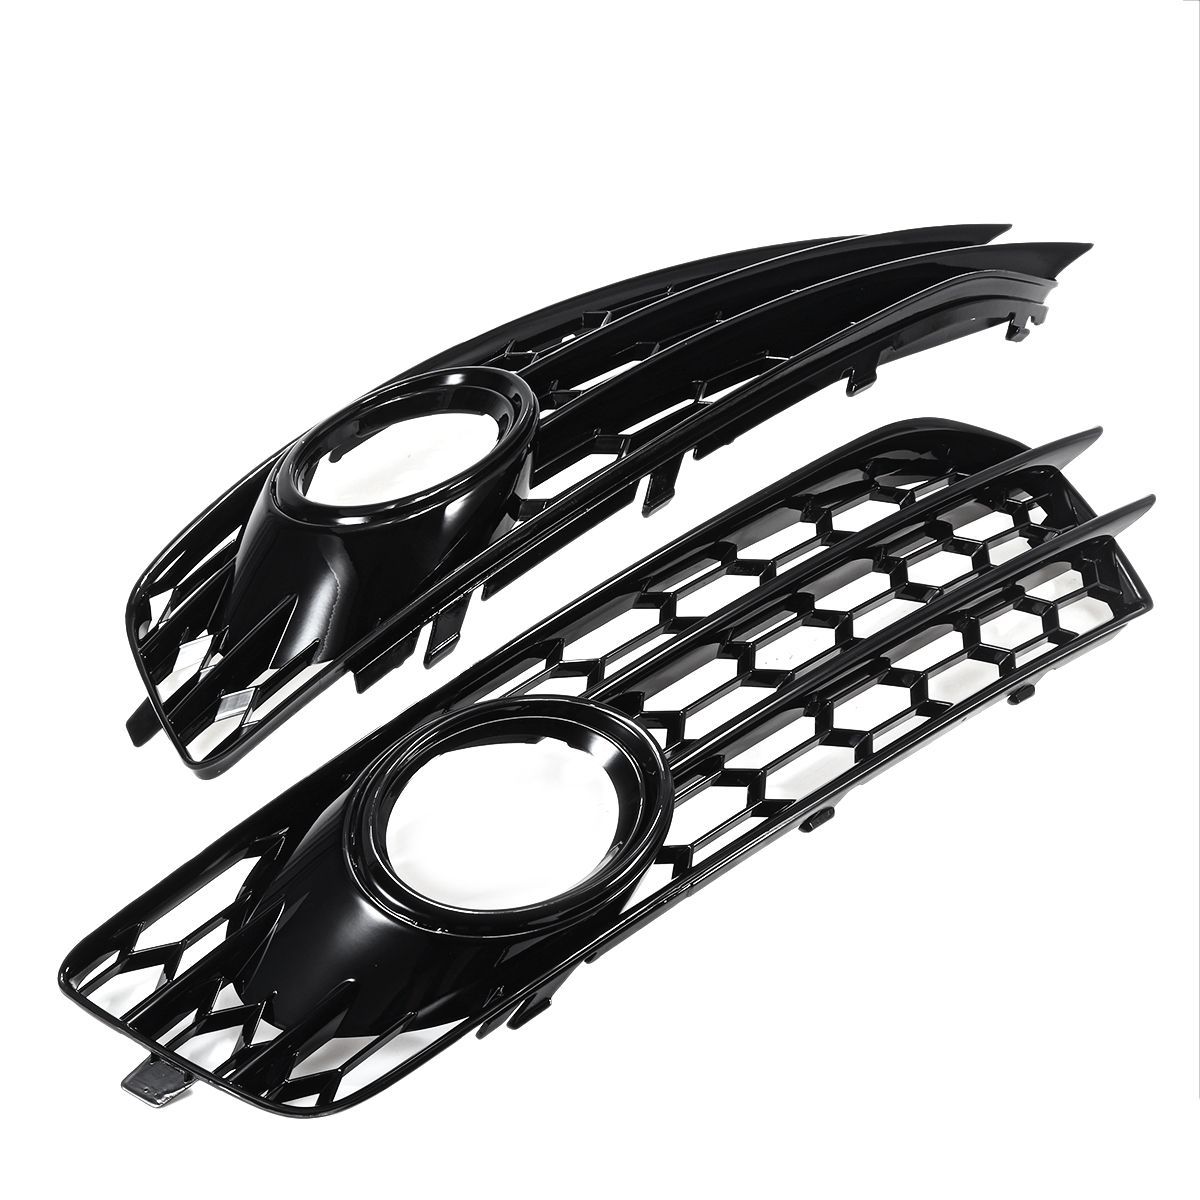 Front-Fog-Light-Lamp-Grille-Grill-Cover-Honeycomb-Hex-Glossy-Black-For-Audi-A3-8P-S-Line-2009-2012-1750298